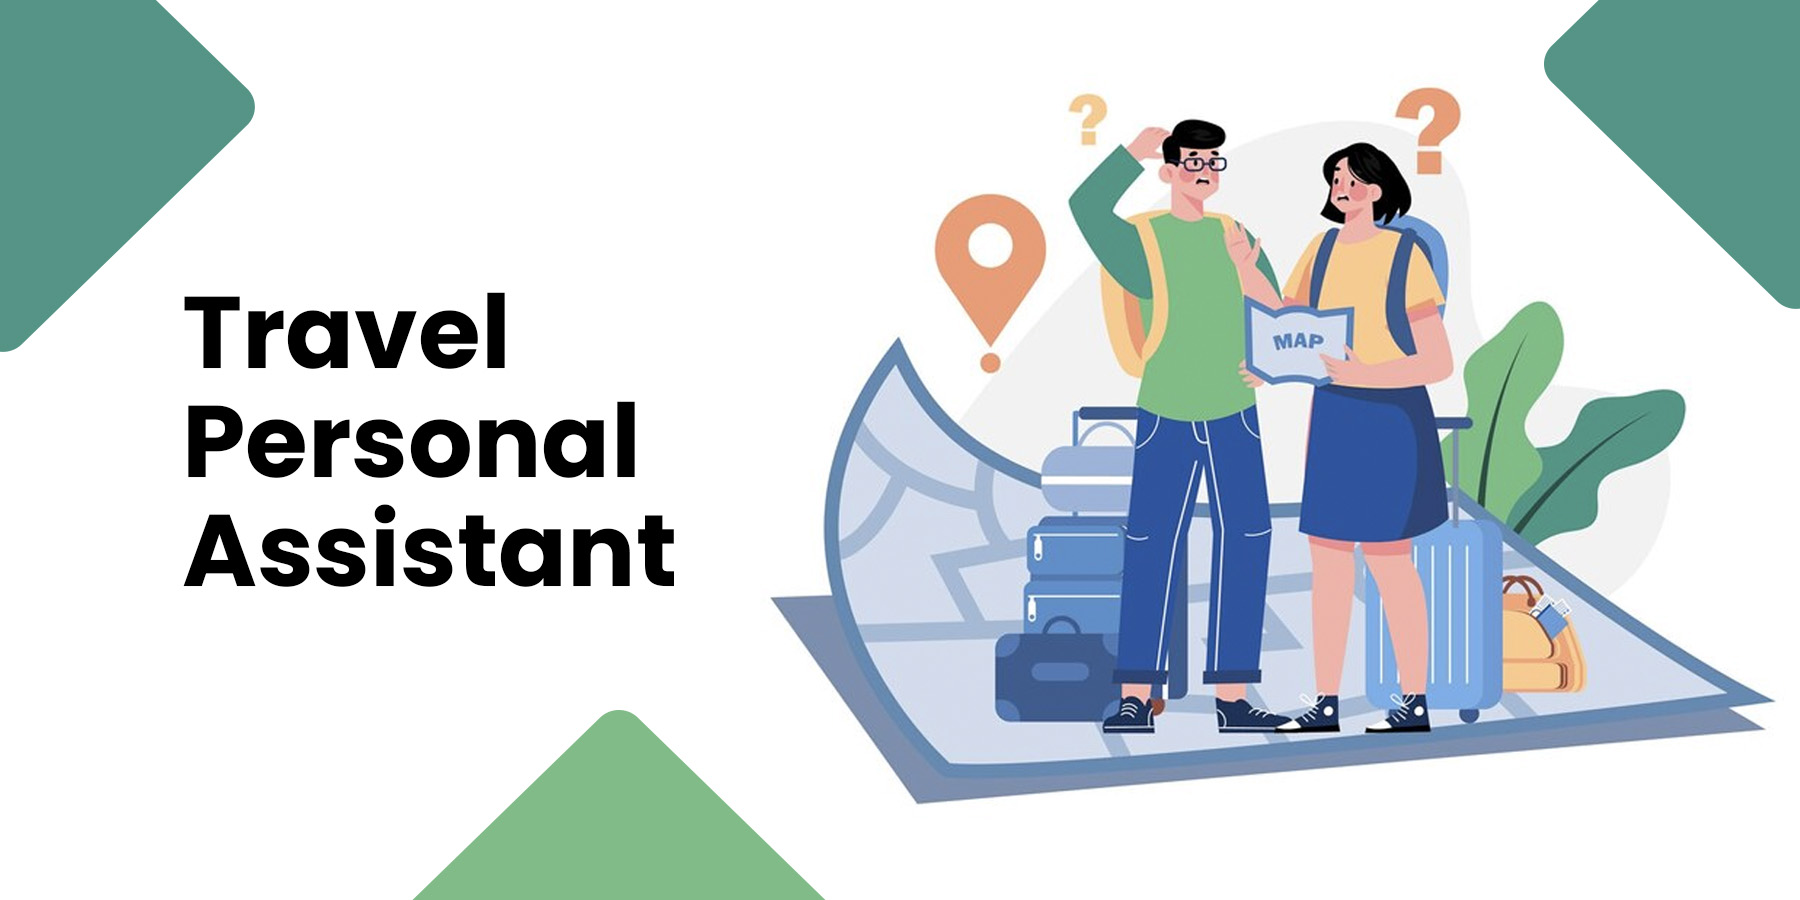 Travel Personal Assistant